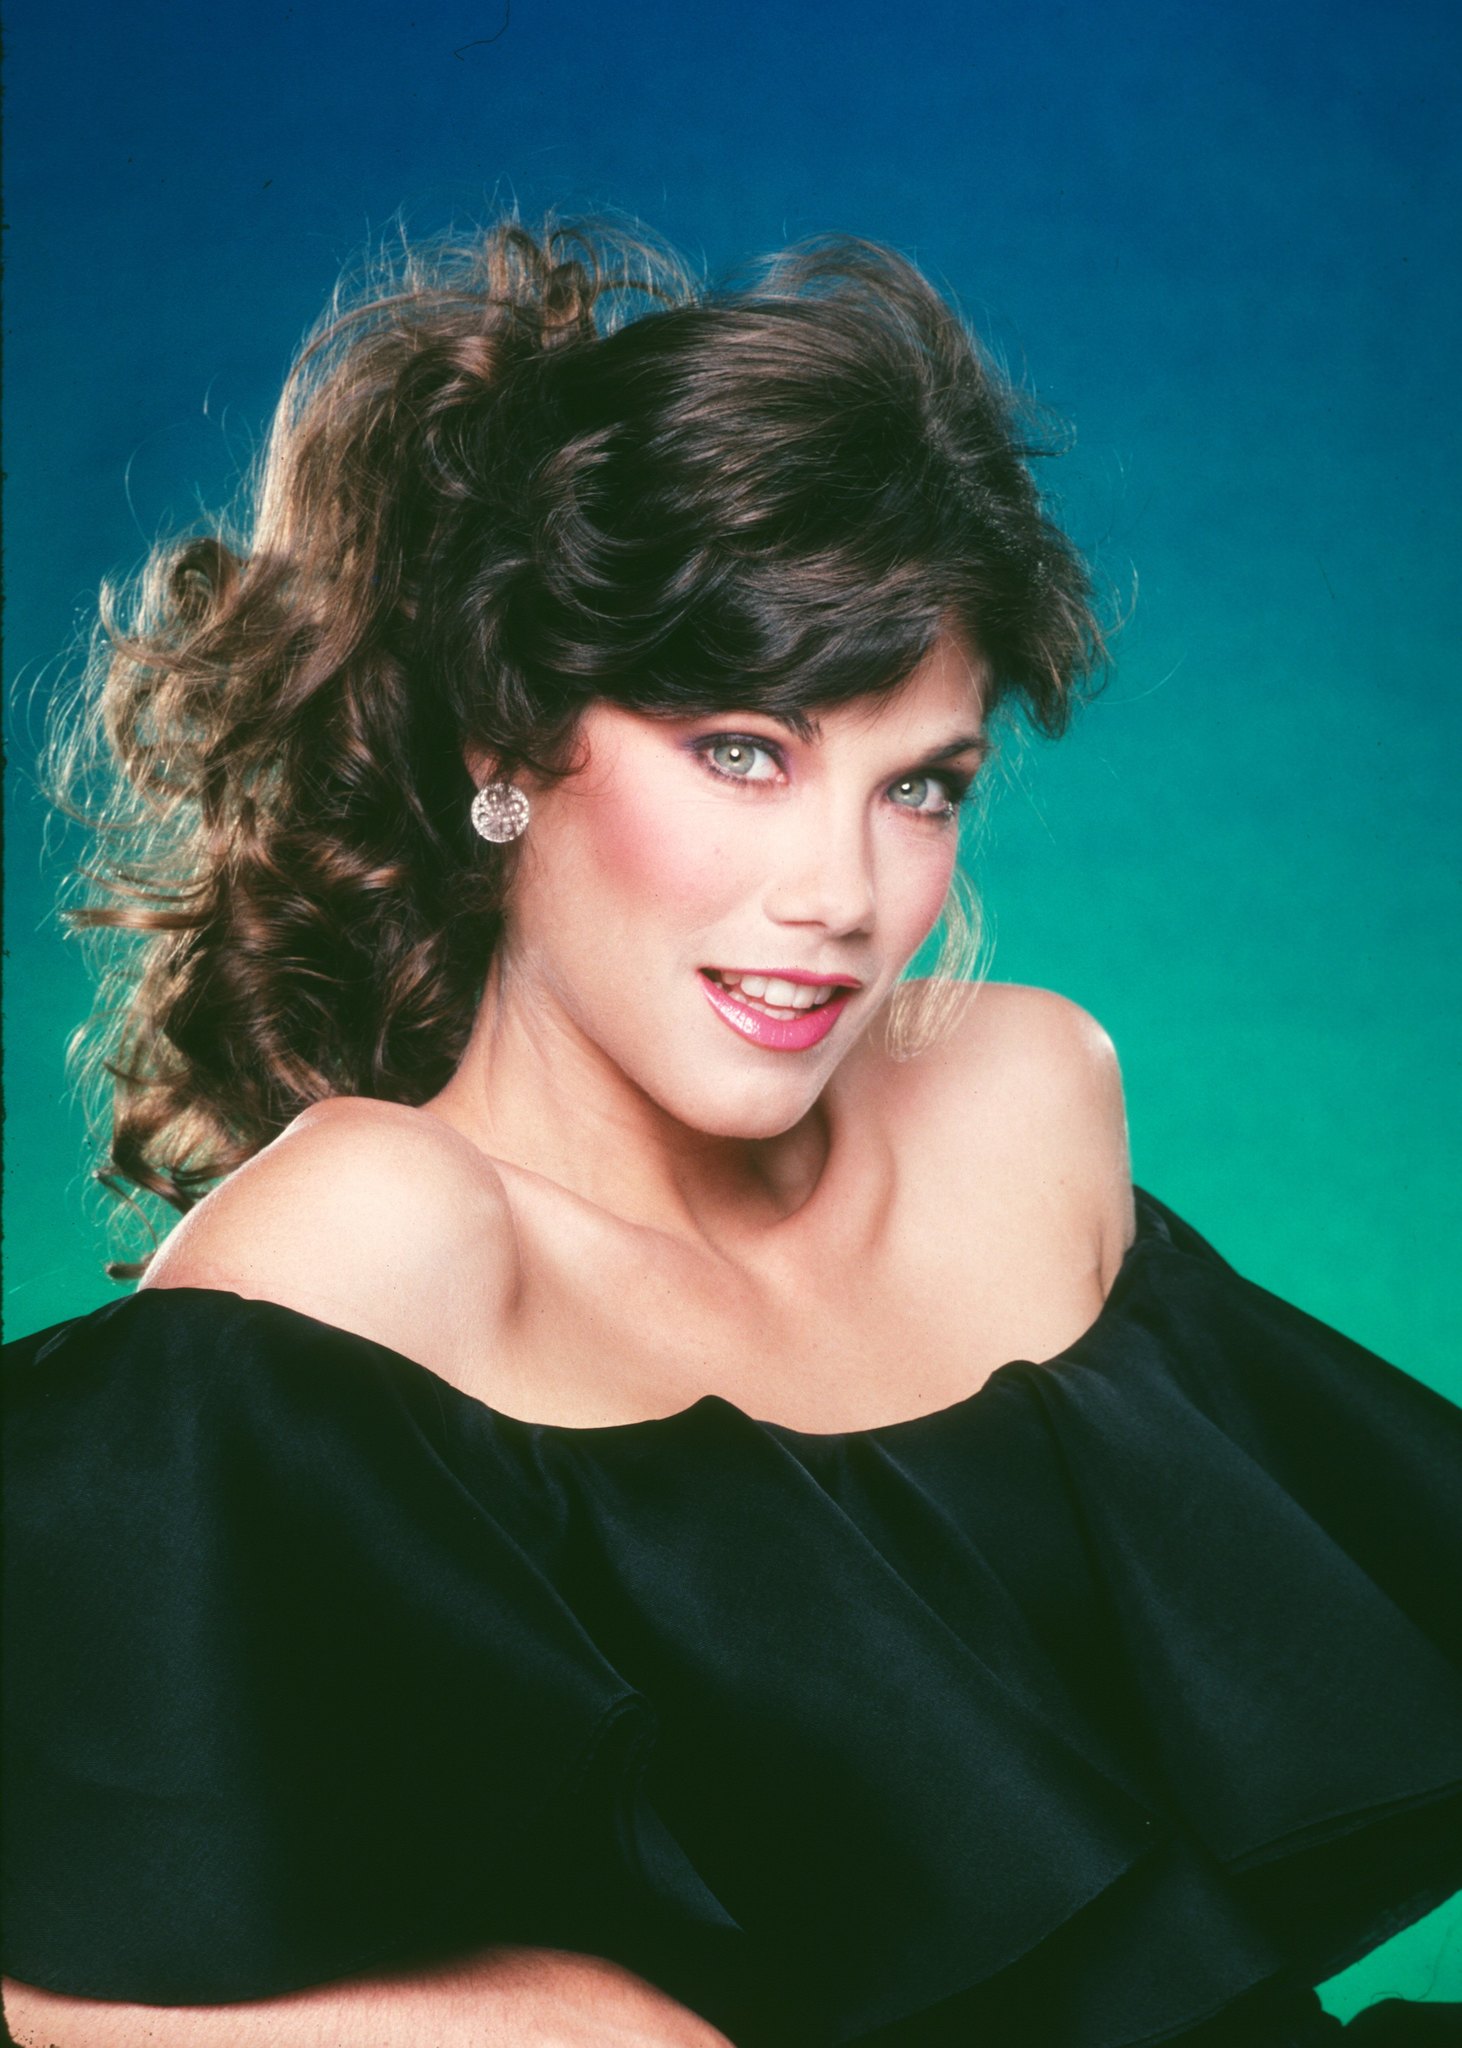 ben debord recommends what does barbi benton look like today pic